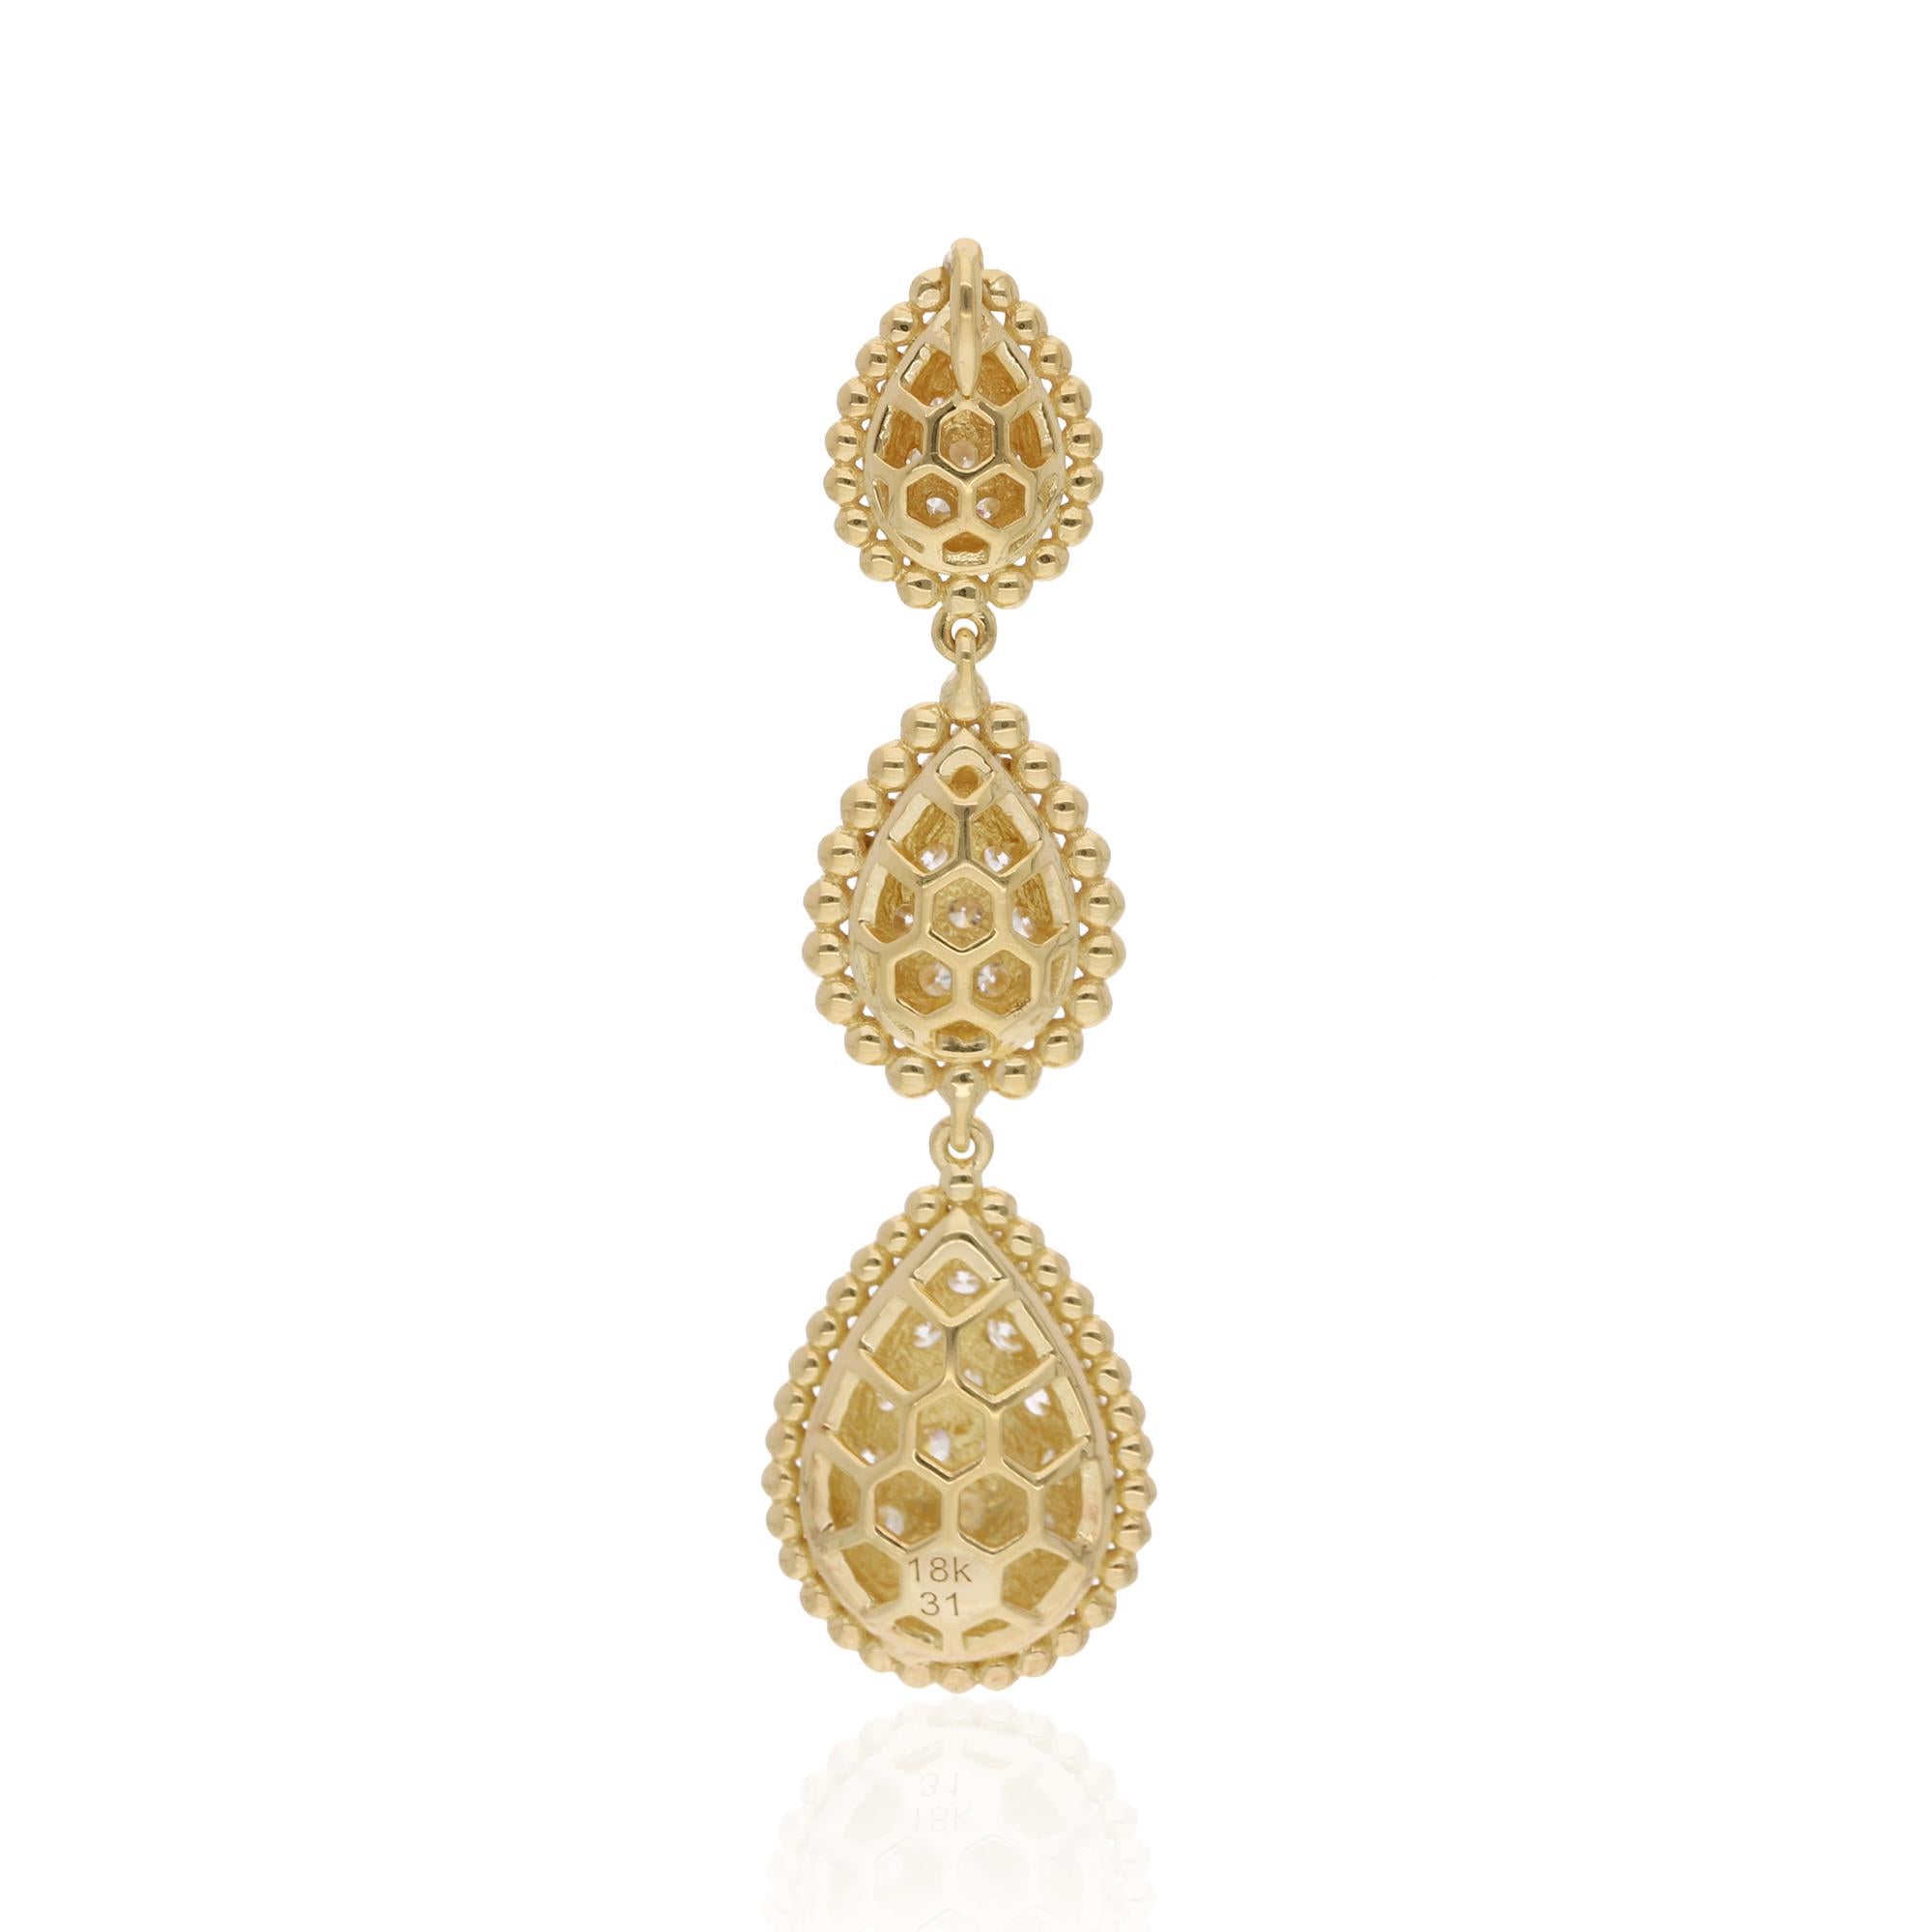 The pendant is expertly crafted in 18-karat yellow gold, adding a touch of luxury and warmth to the overall design. The yellow gold beautifully complements the diamond, creating a harmonious combination that exudes sophistication and elegance.

Item